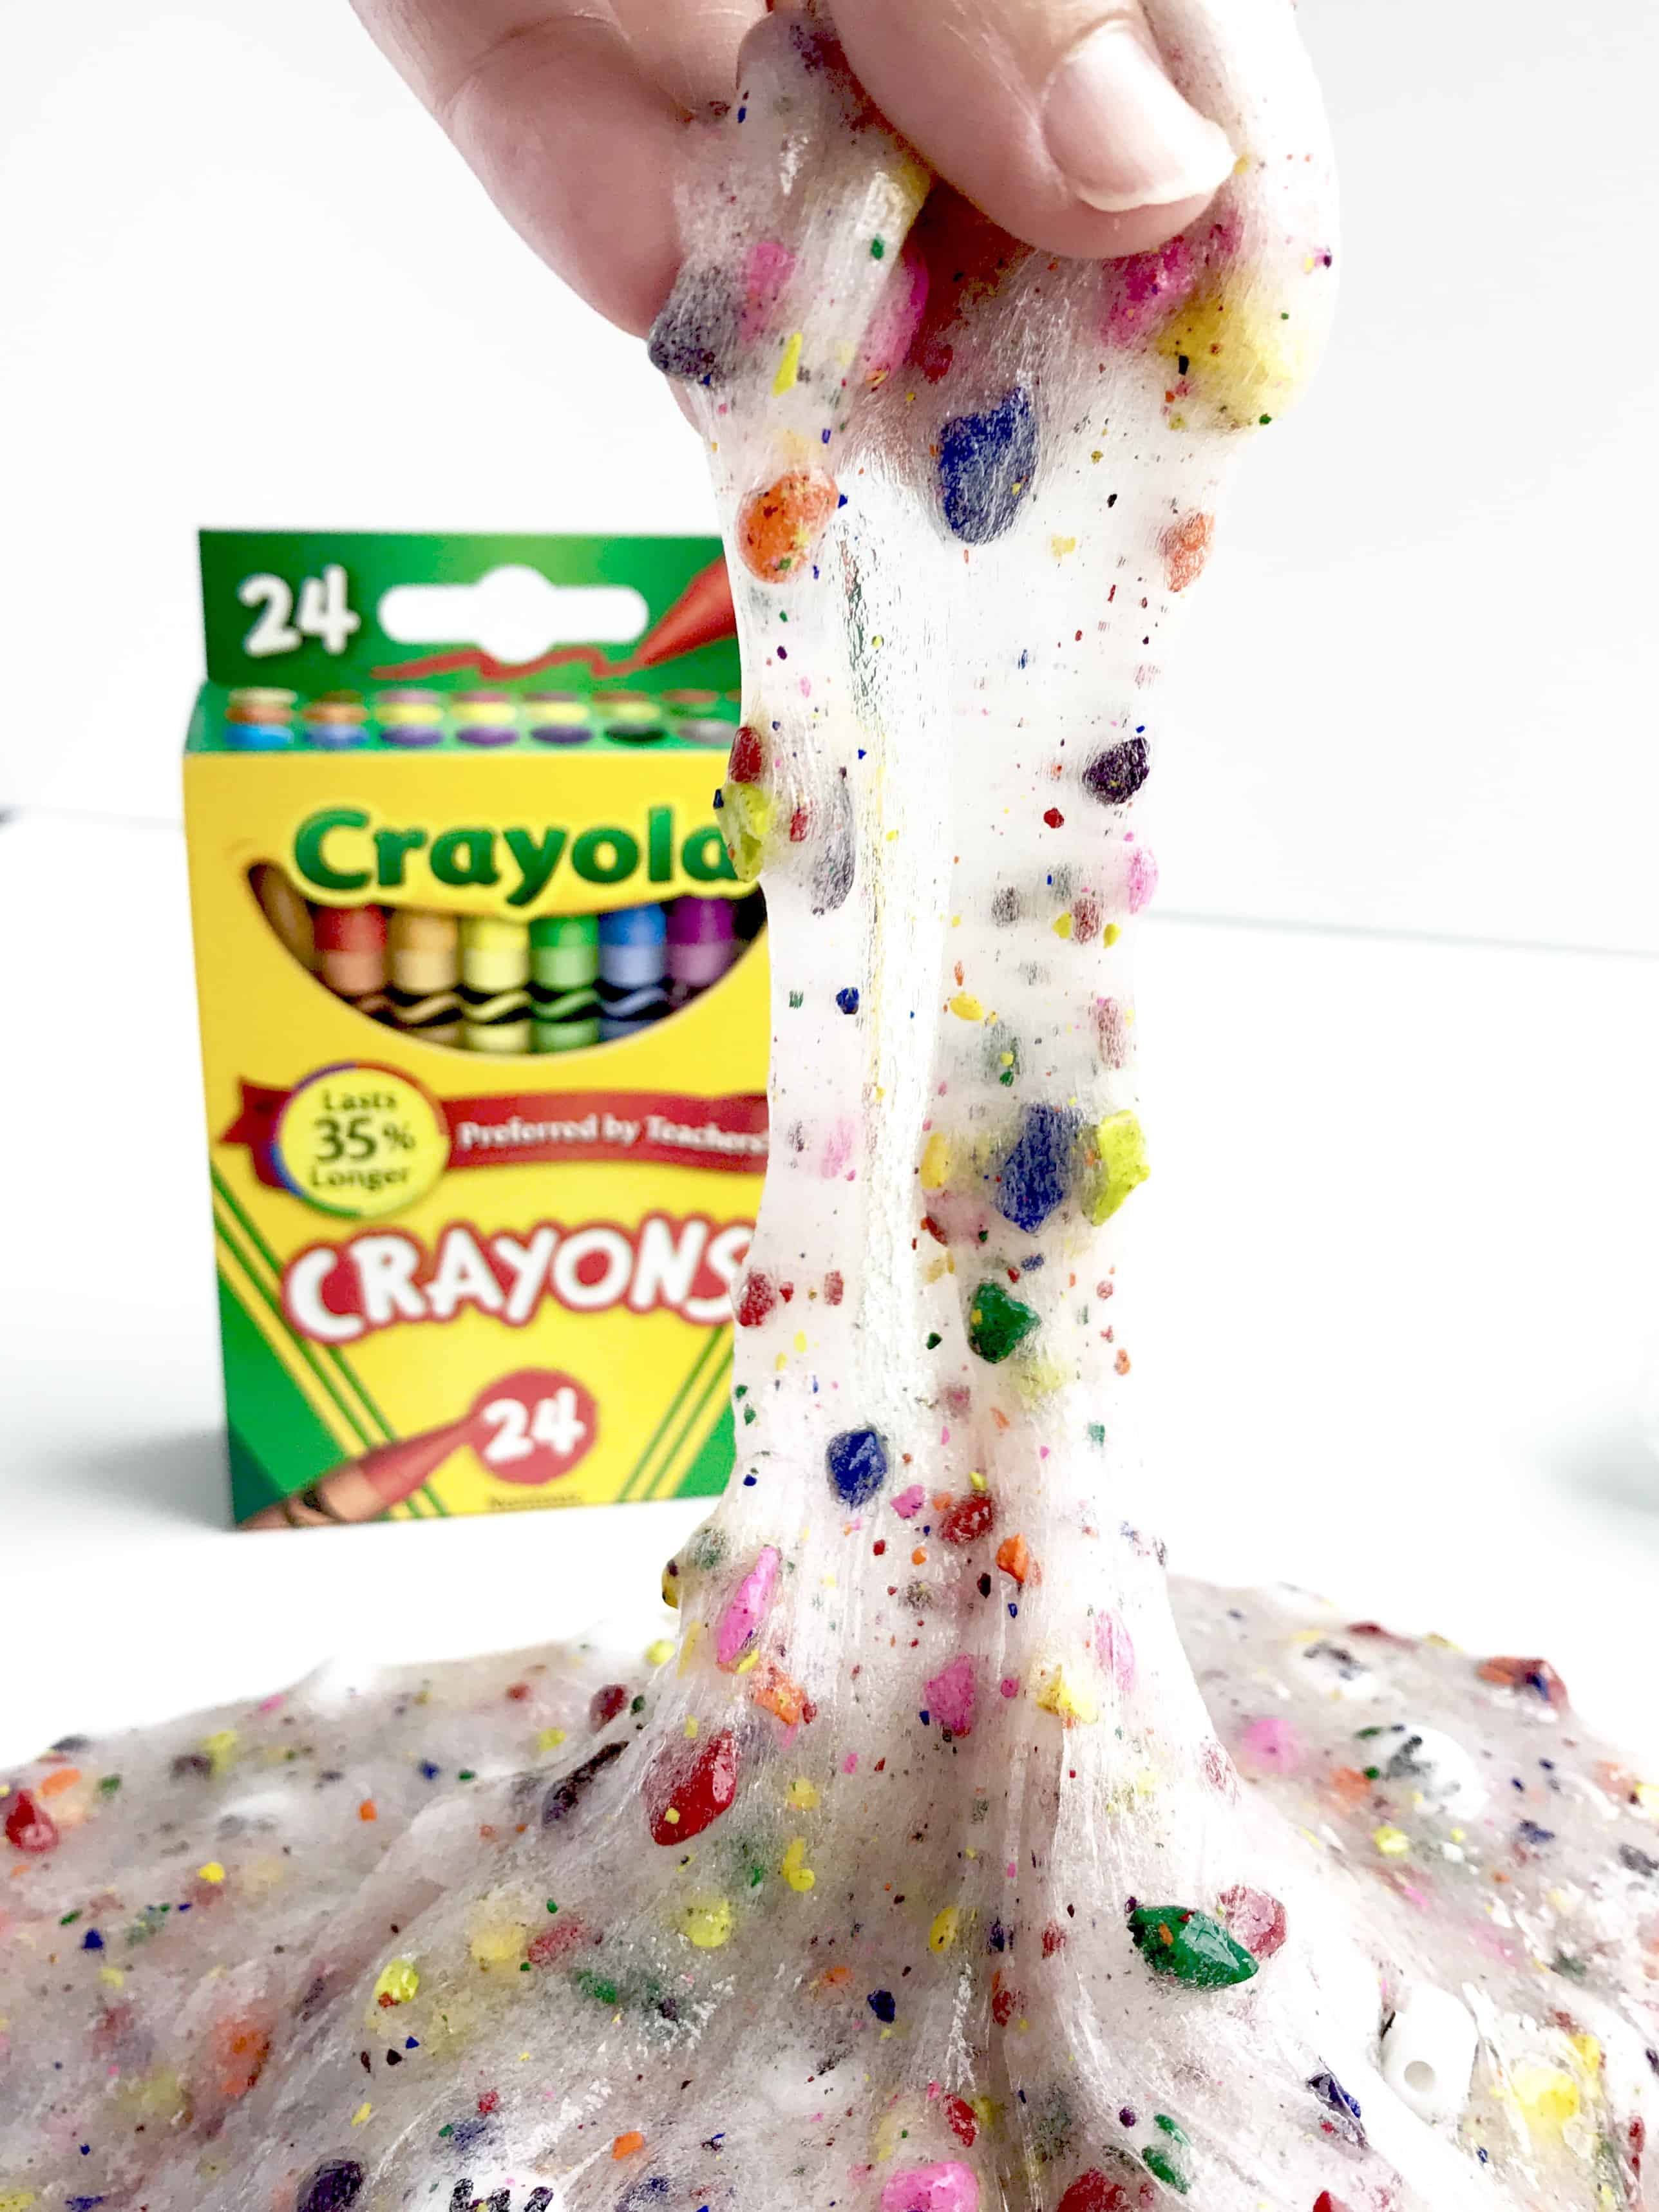 Crayon Slime made with crayons